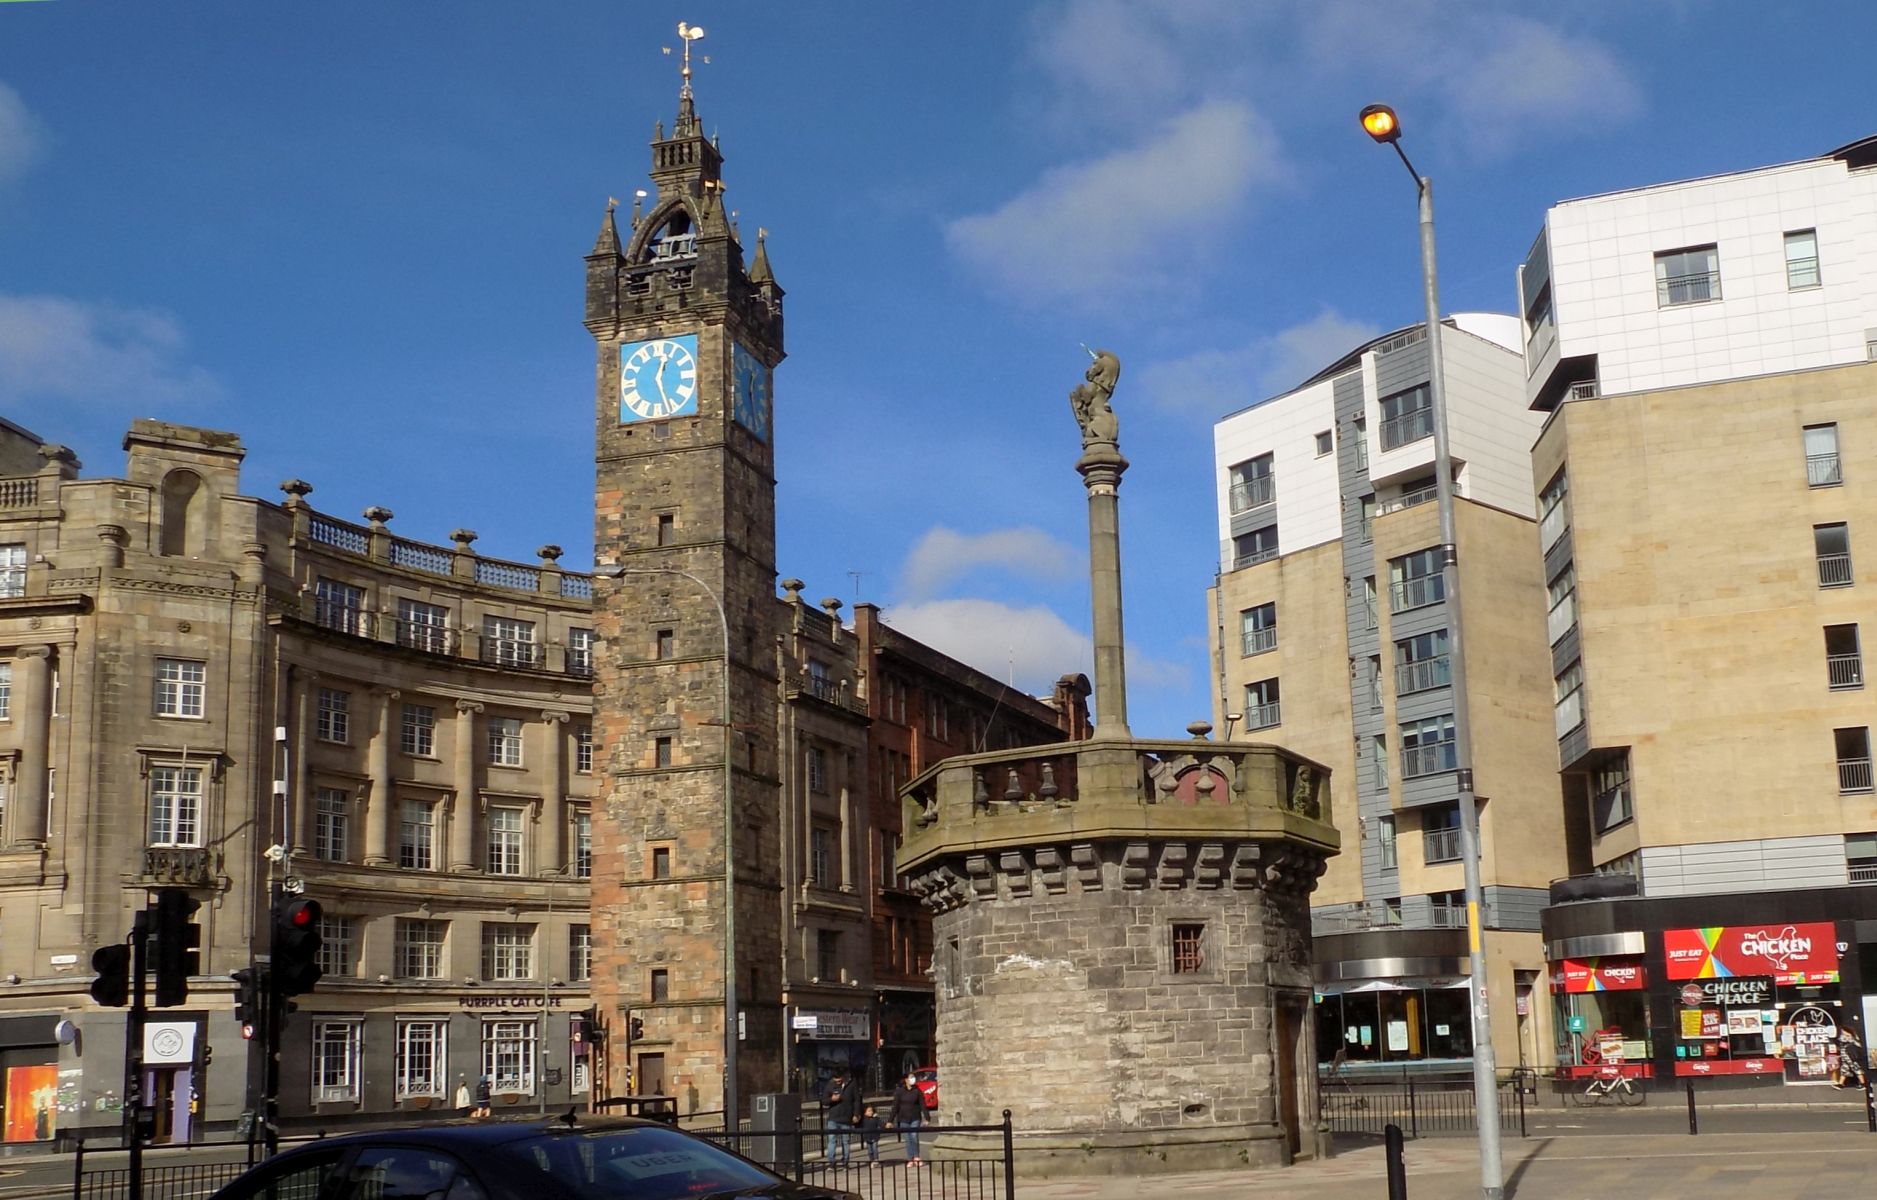 Tolbooth Steeple and Mercat Cross in Glasgow